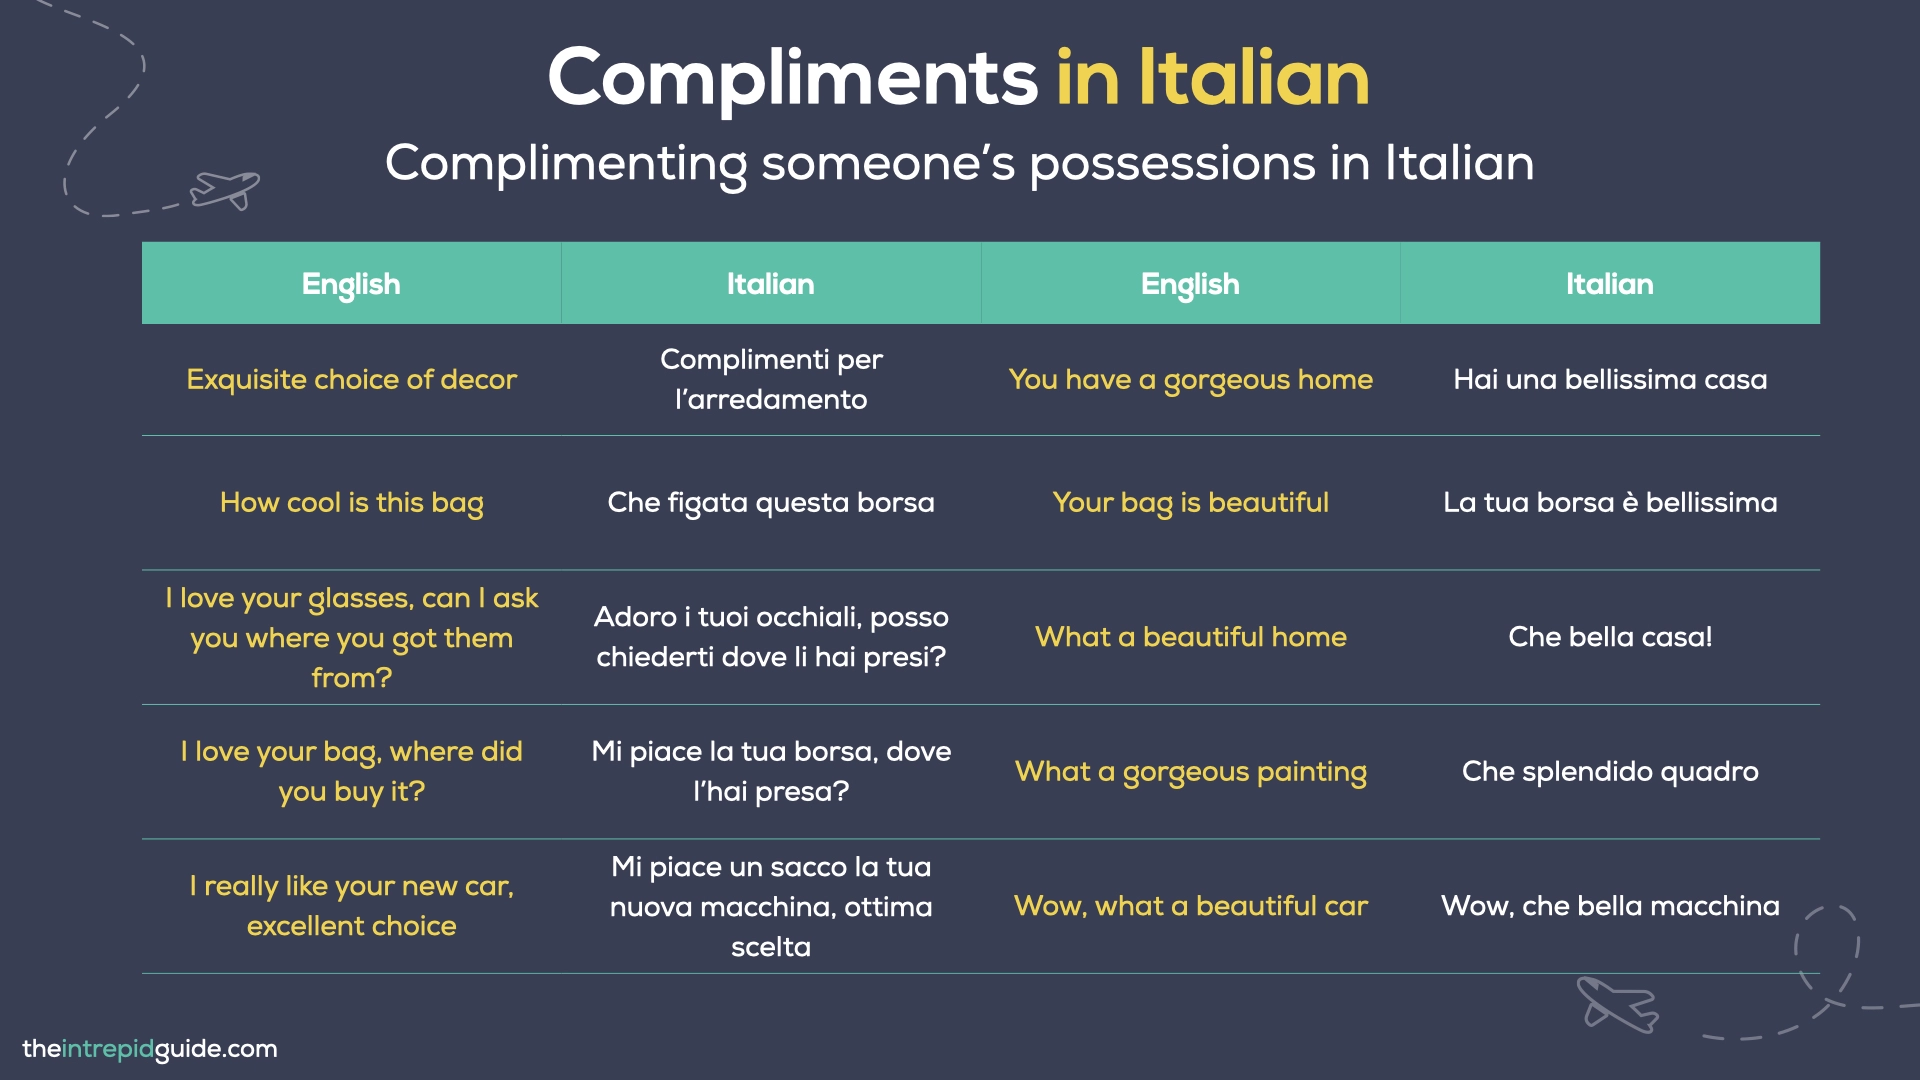 Compliments in Italian - Complimenting someone’s possessions in Italian